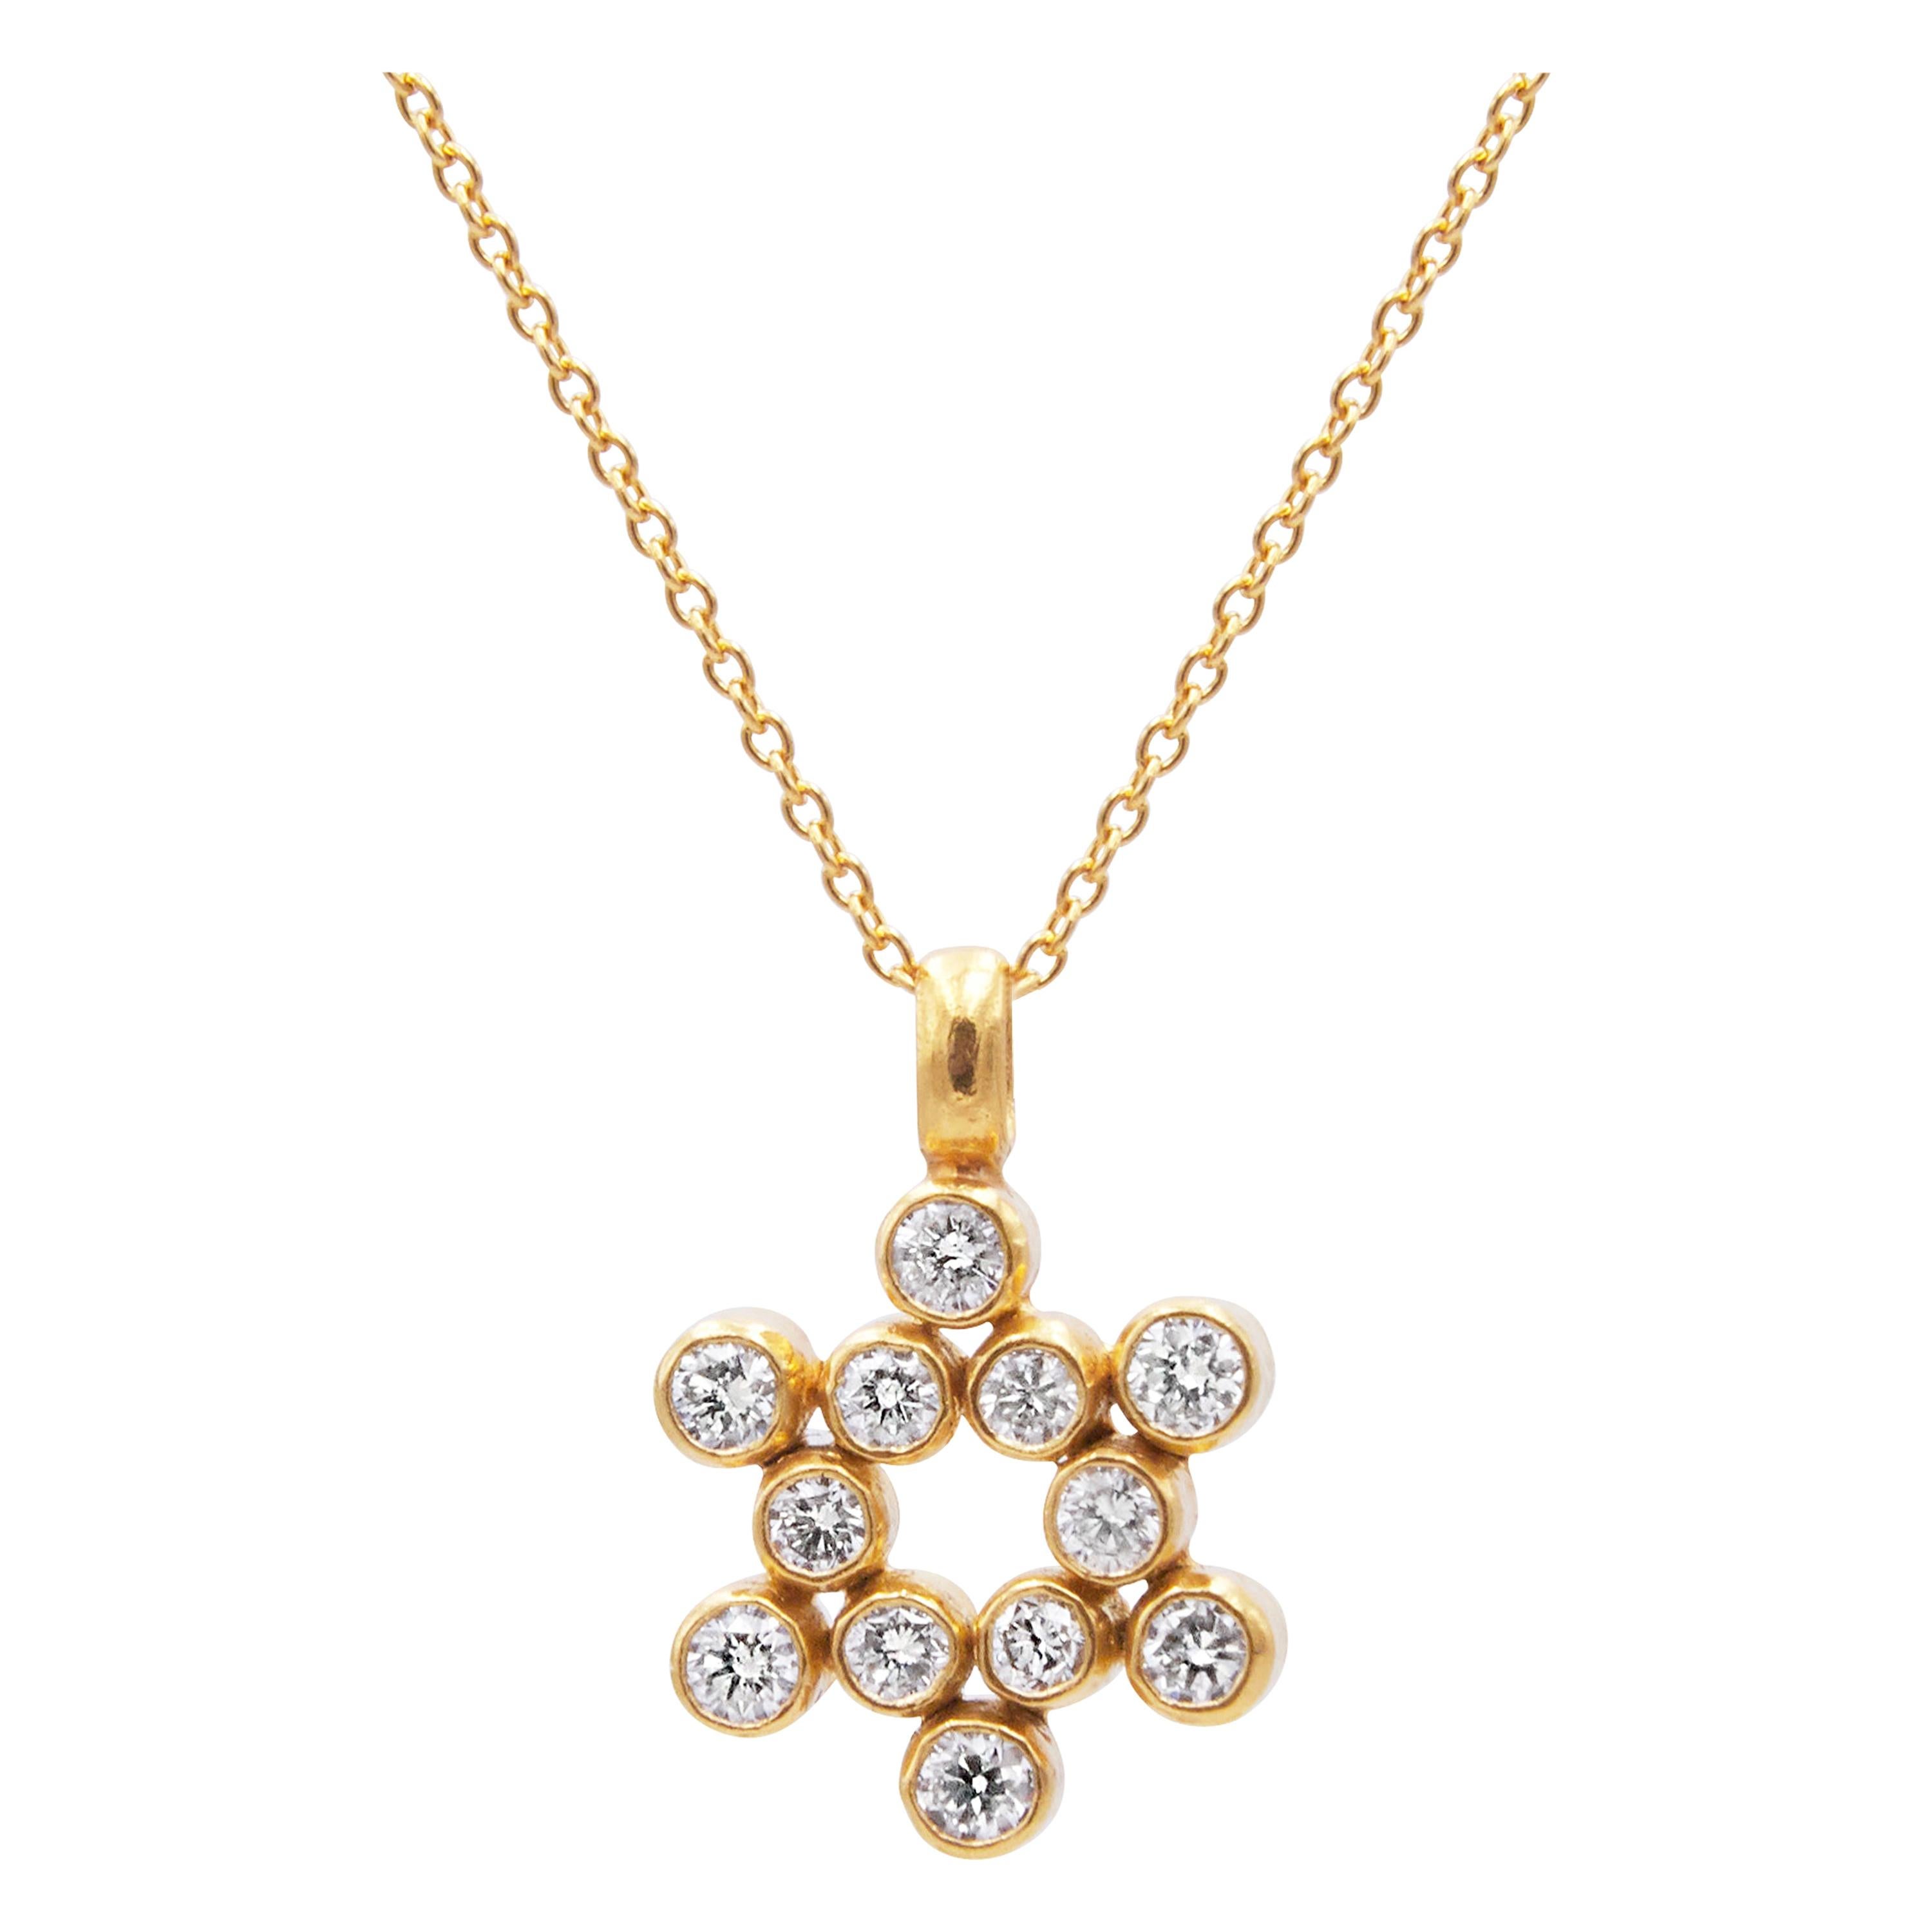 GURHAN 22-24 Karat Hammered Yellow Gold and White Diamond Pendant Necklace For Sale